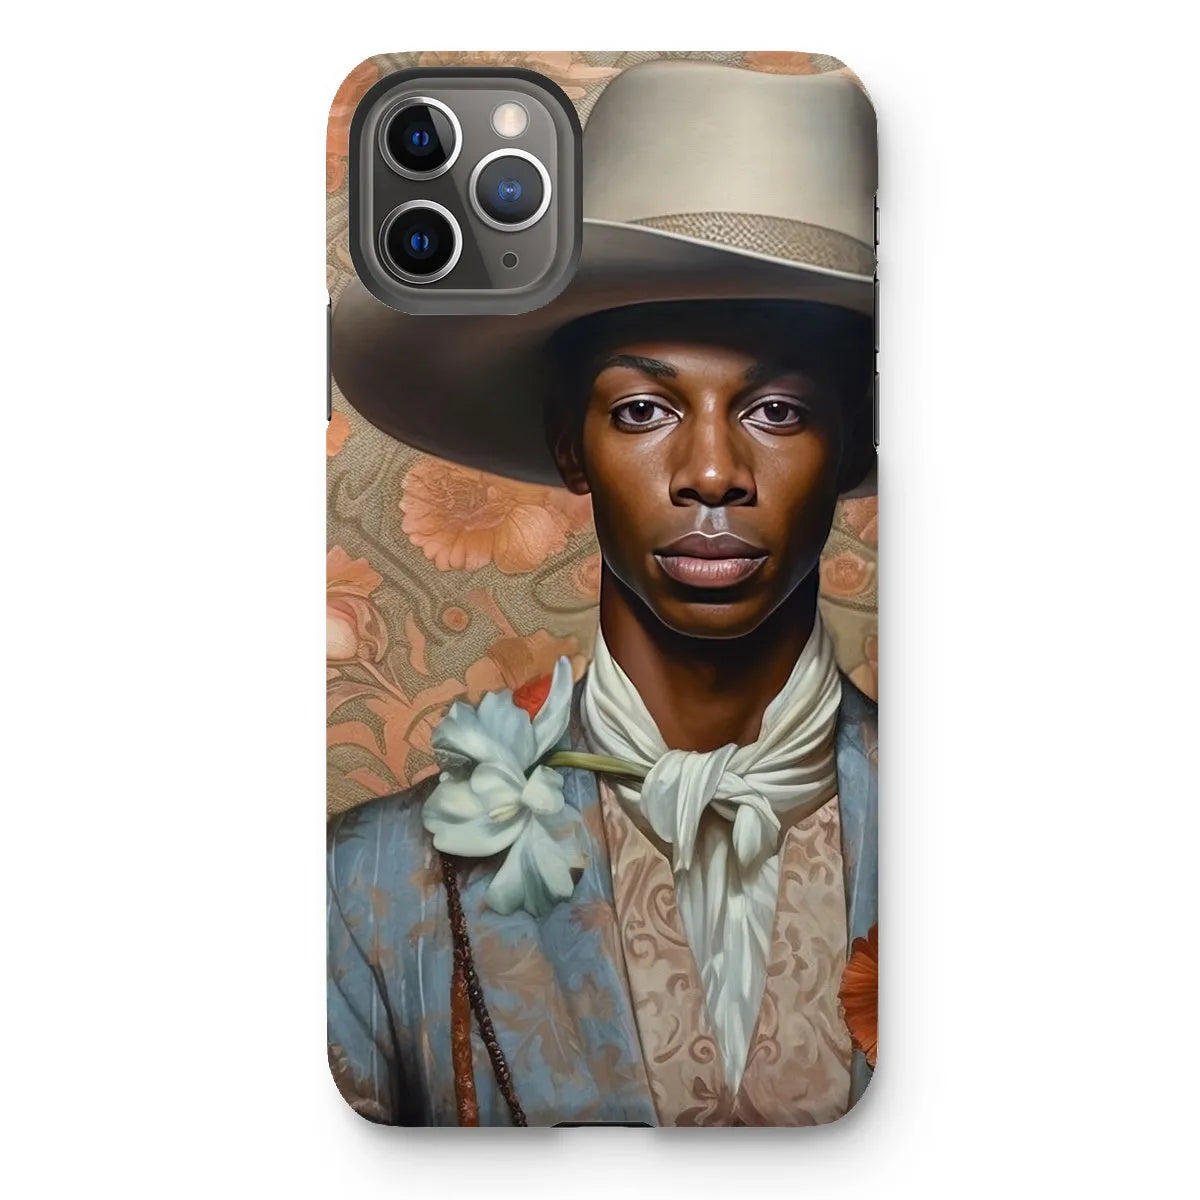 Apollo The Gay Cowboy - Gay Aesthetic Art Phone Case - Iphone 11 Pro Max / Matte - Mobile Phone Cases - Aesthetic Art